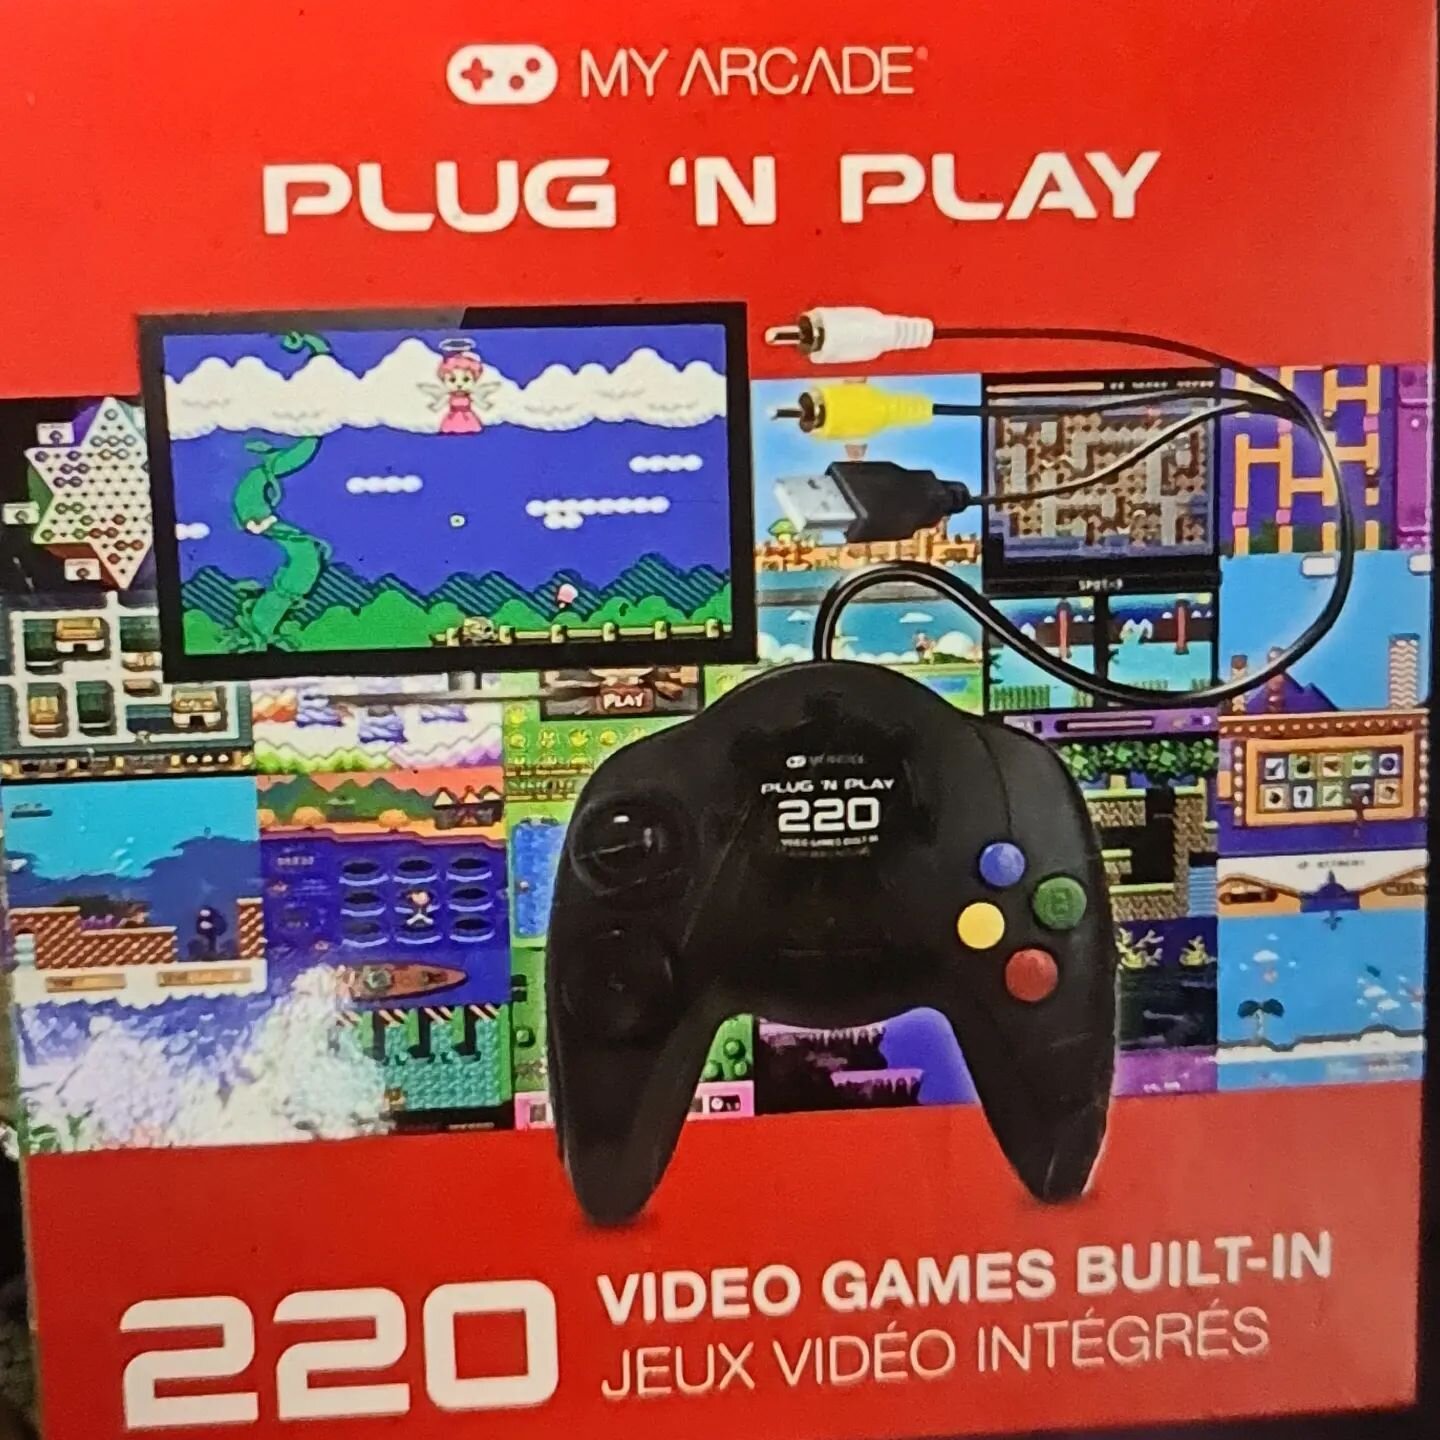 My Arcade Plug And Play 220 Video Games Built In Console now only &pound;9.99 save &pound;10 while stocks last